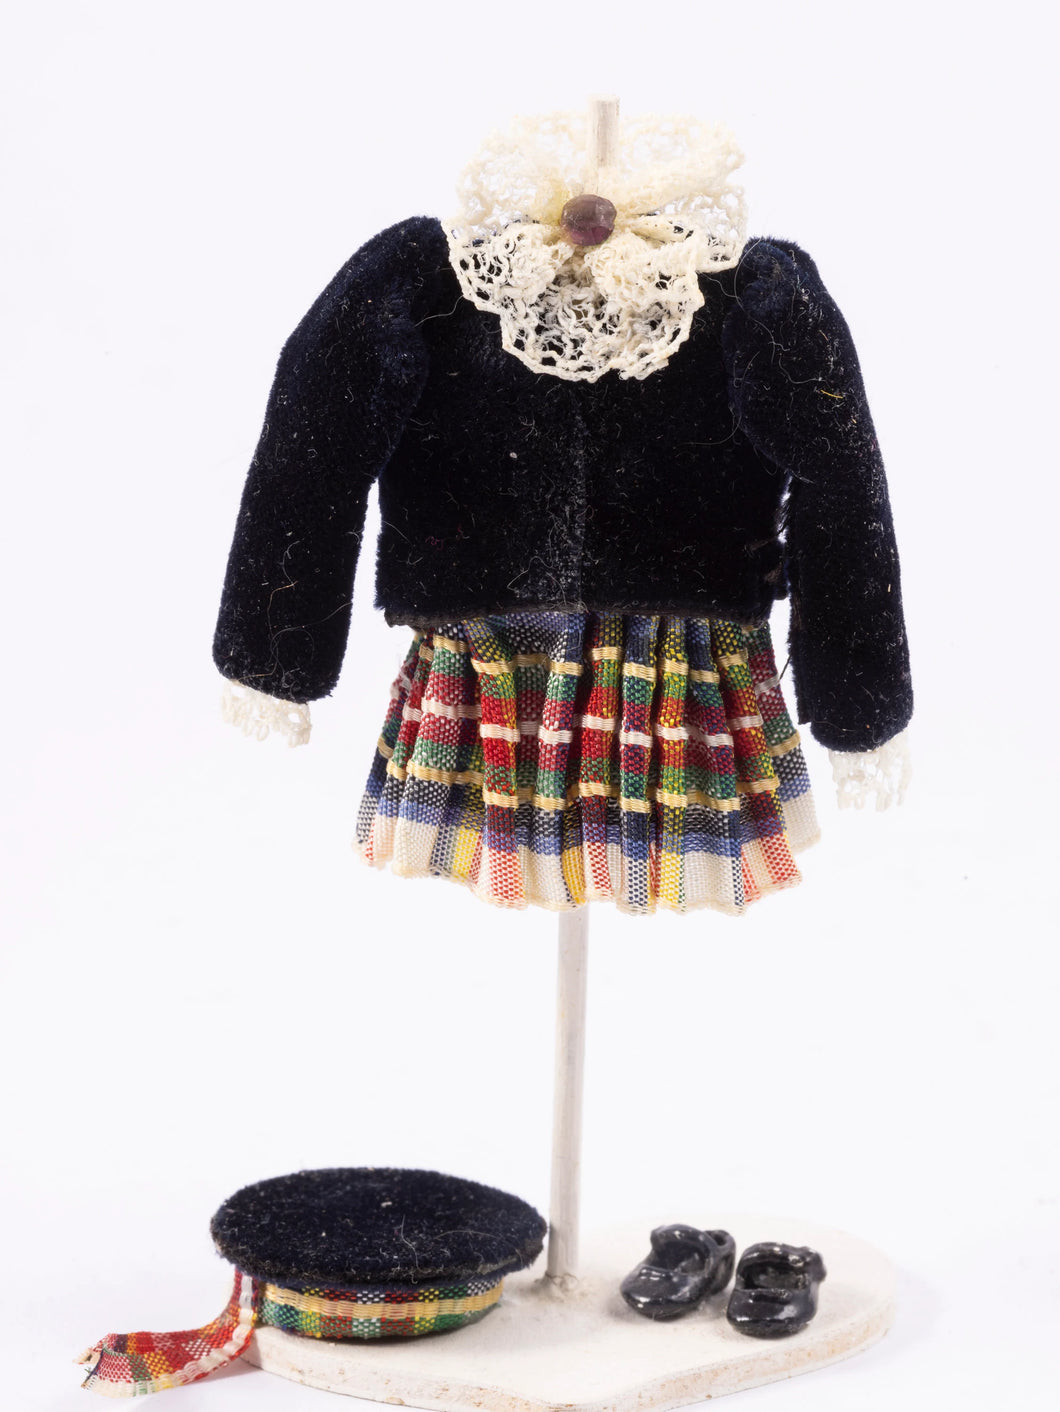 Scottish Kilt Outfit with Black Jacket & Cap for Young Girl